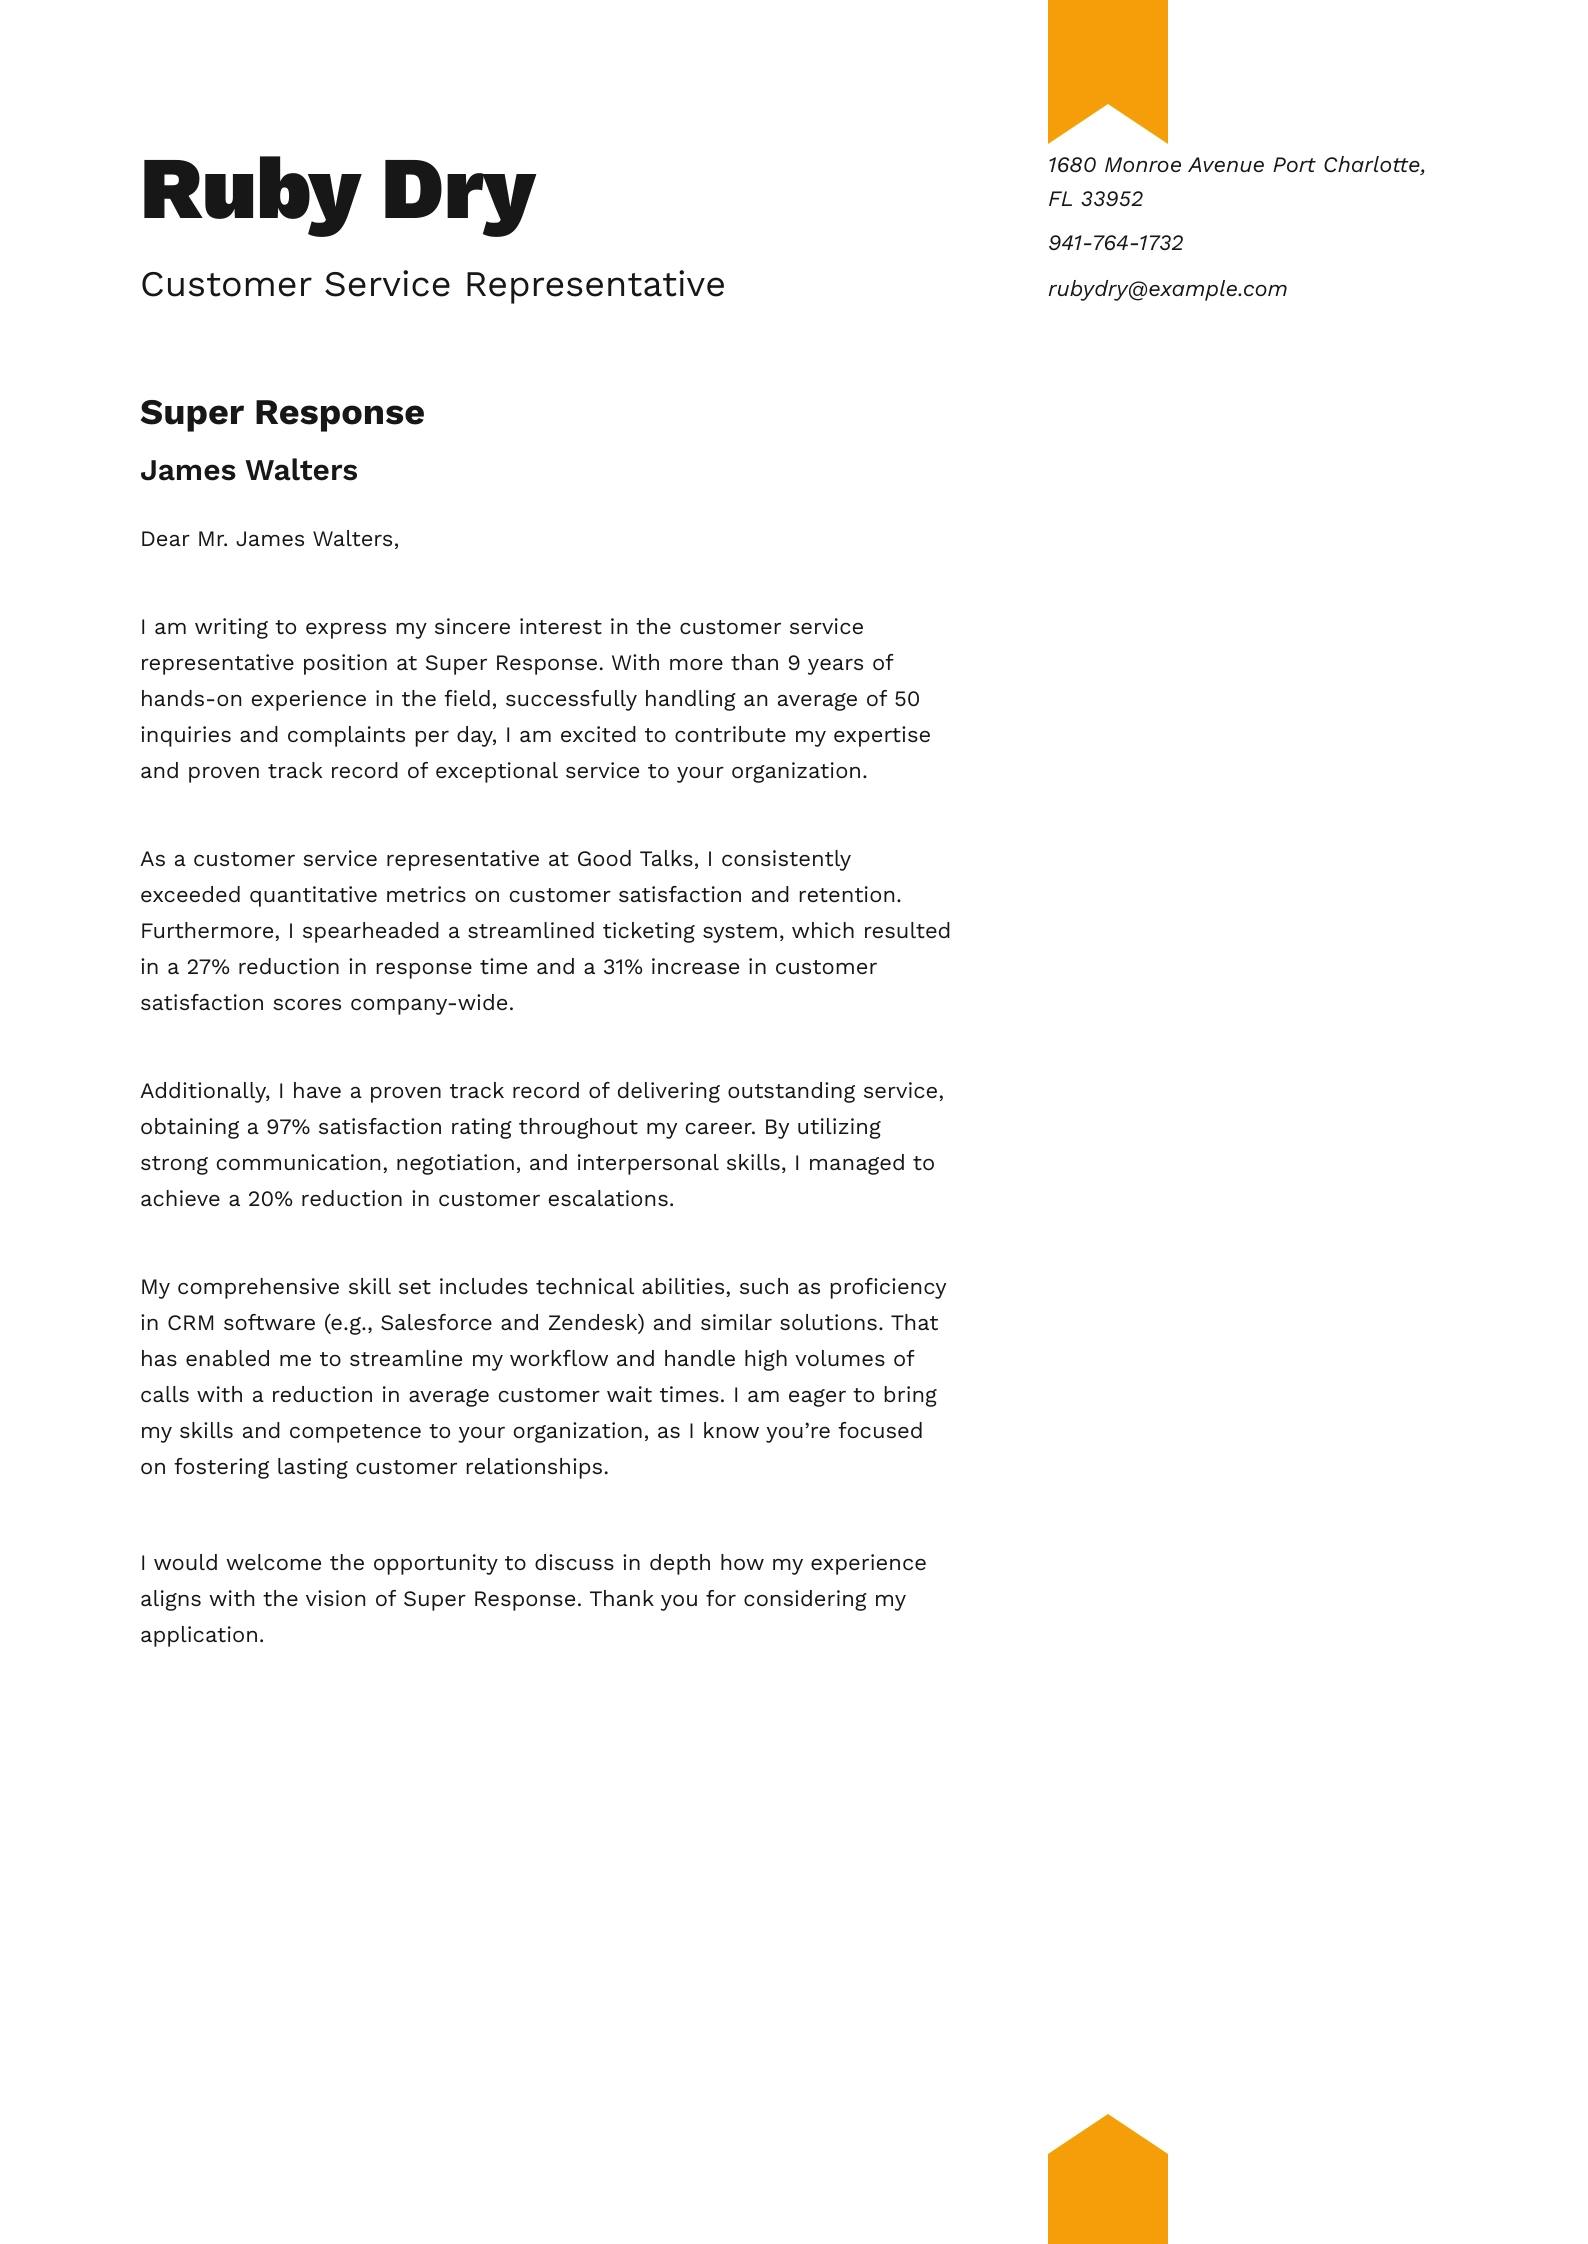 Customer Service Cover Letter Example